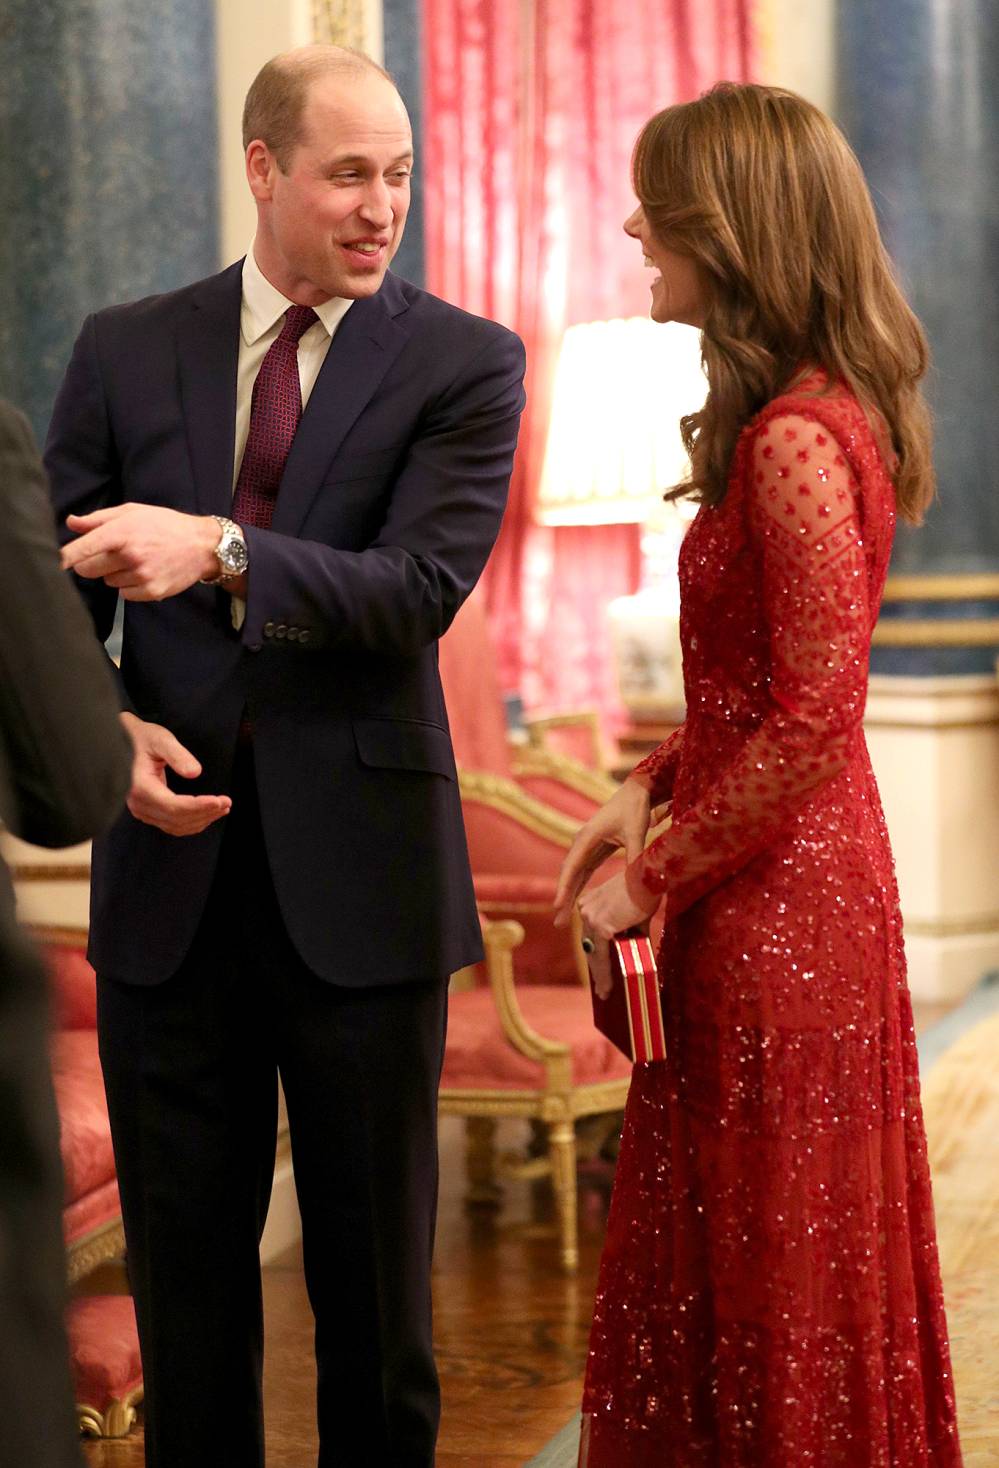 Prince William, Duchess Kate Smile at Buckingham Palace Event | Us Weekly